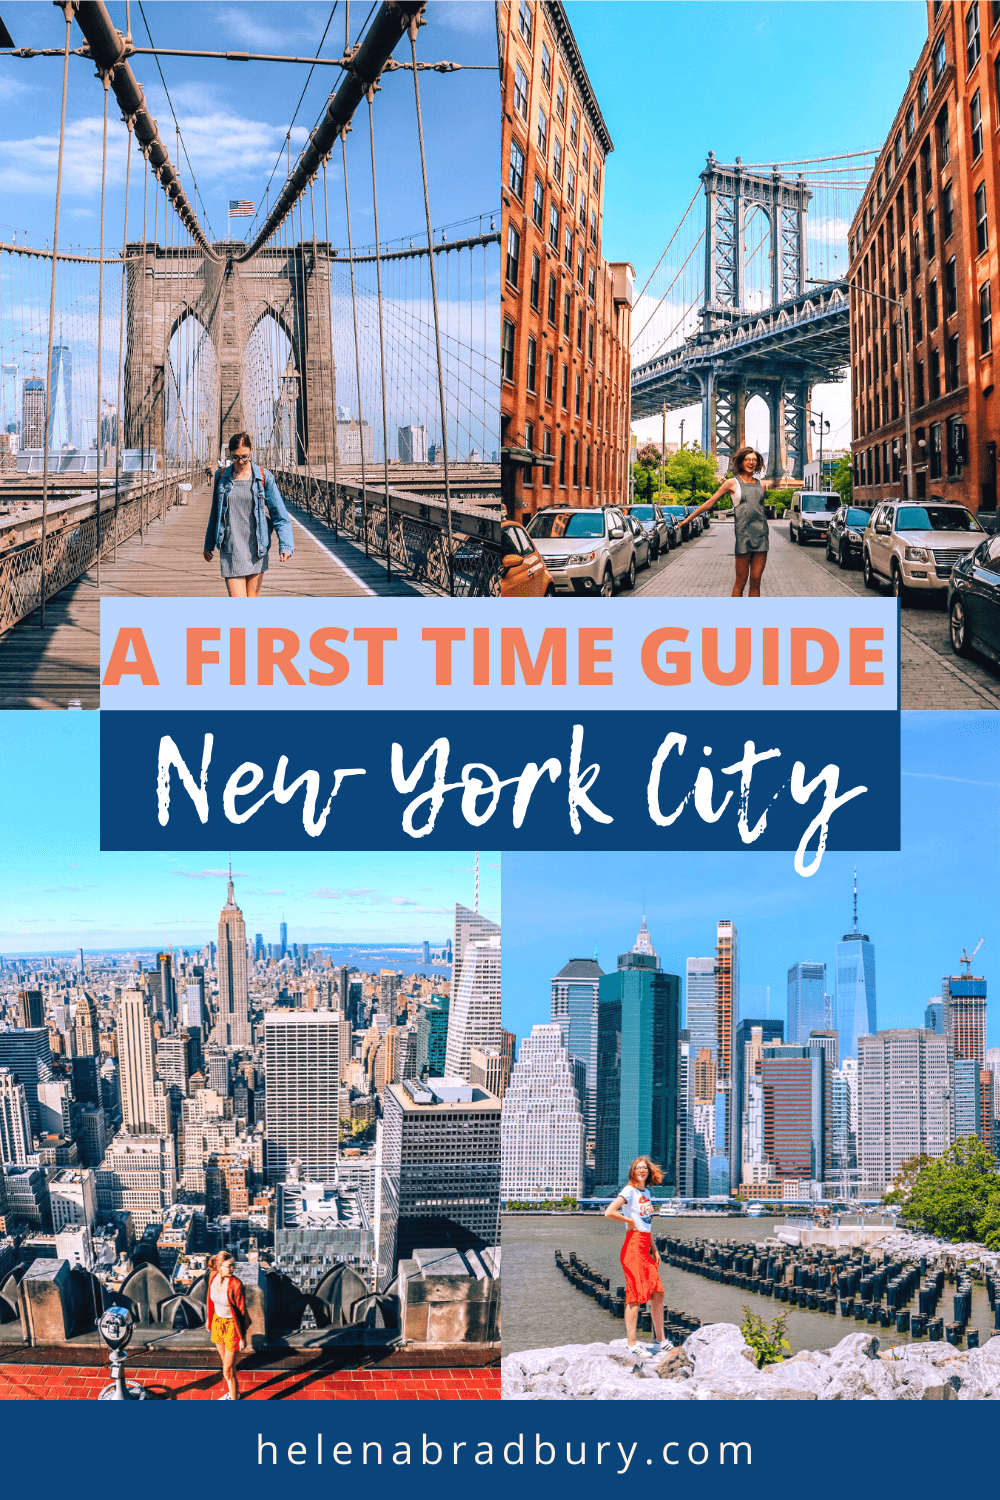 A First Timer's Guide and New York trip itinerary